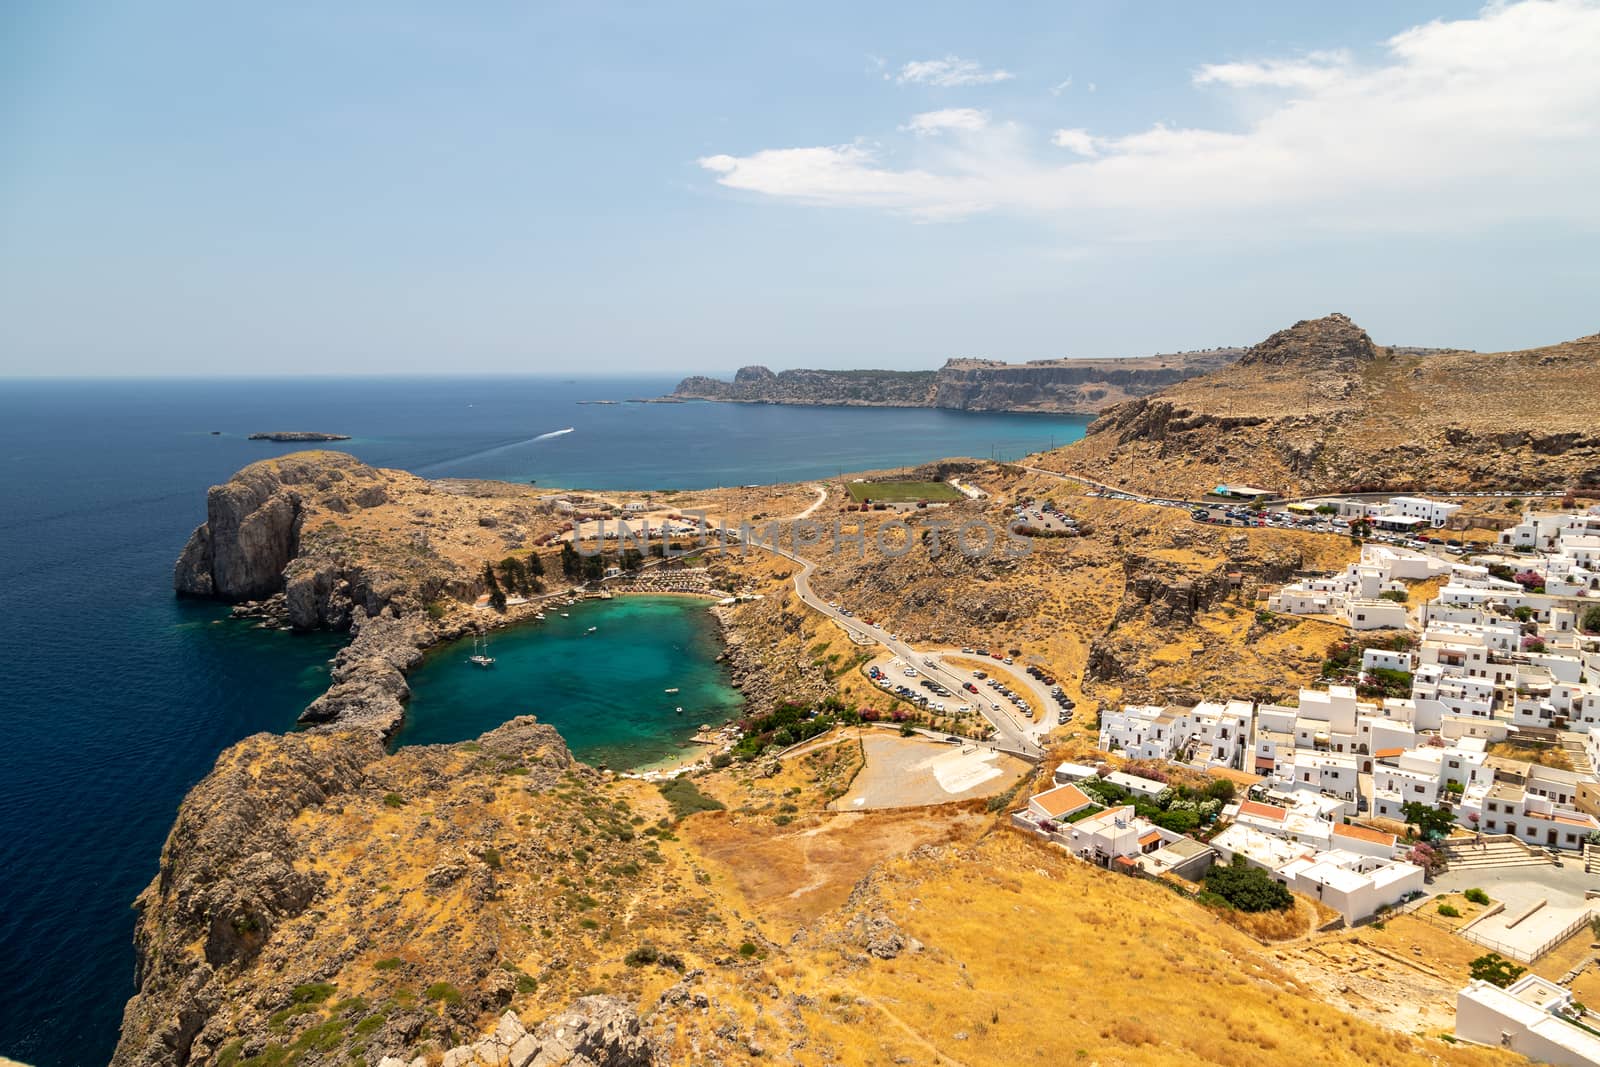 Scenic view from the acropolis of Lindos at the coastline of the mediterranean sea, the city of Lindos  and St. Pauls bay with clear and turquoise water